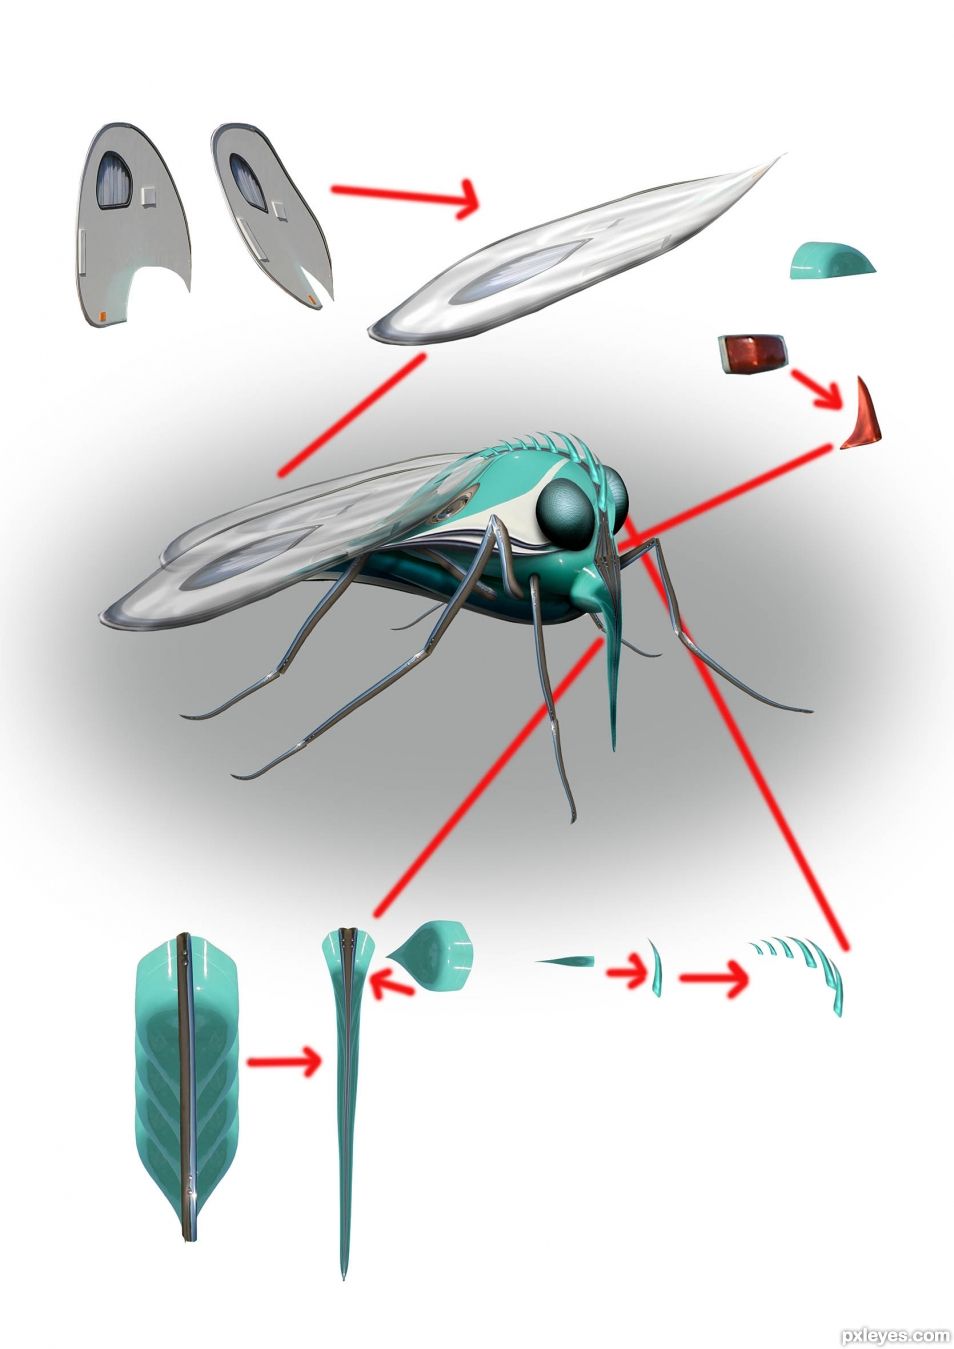 Creation of alien mosquito: Step 3